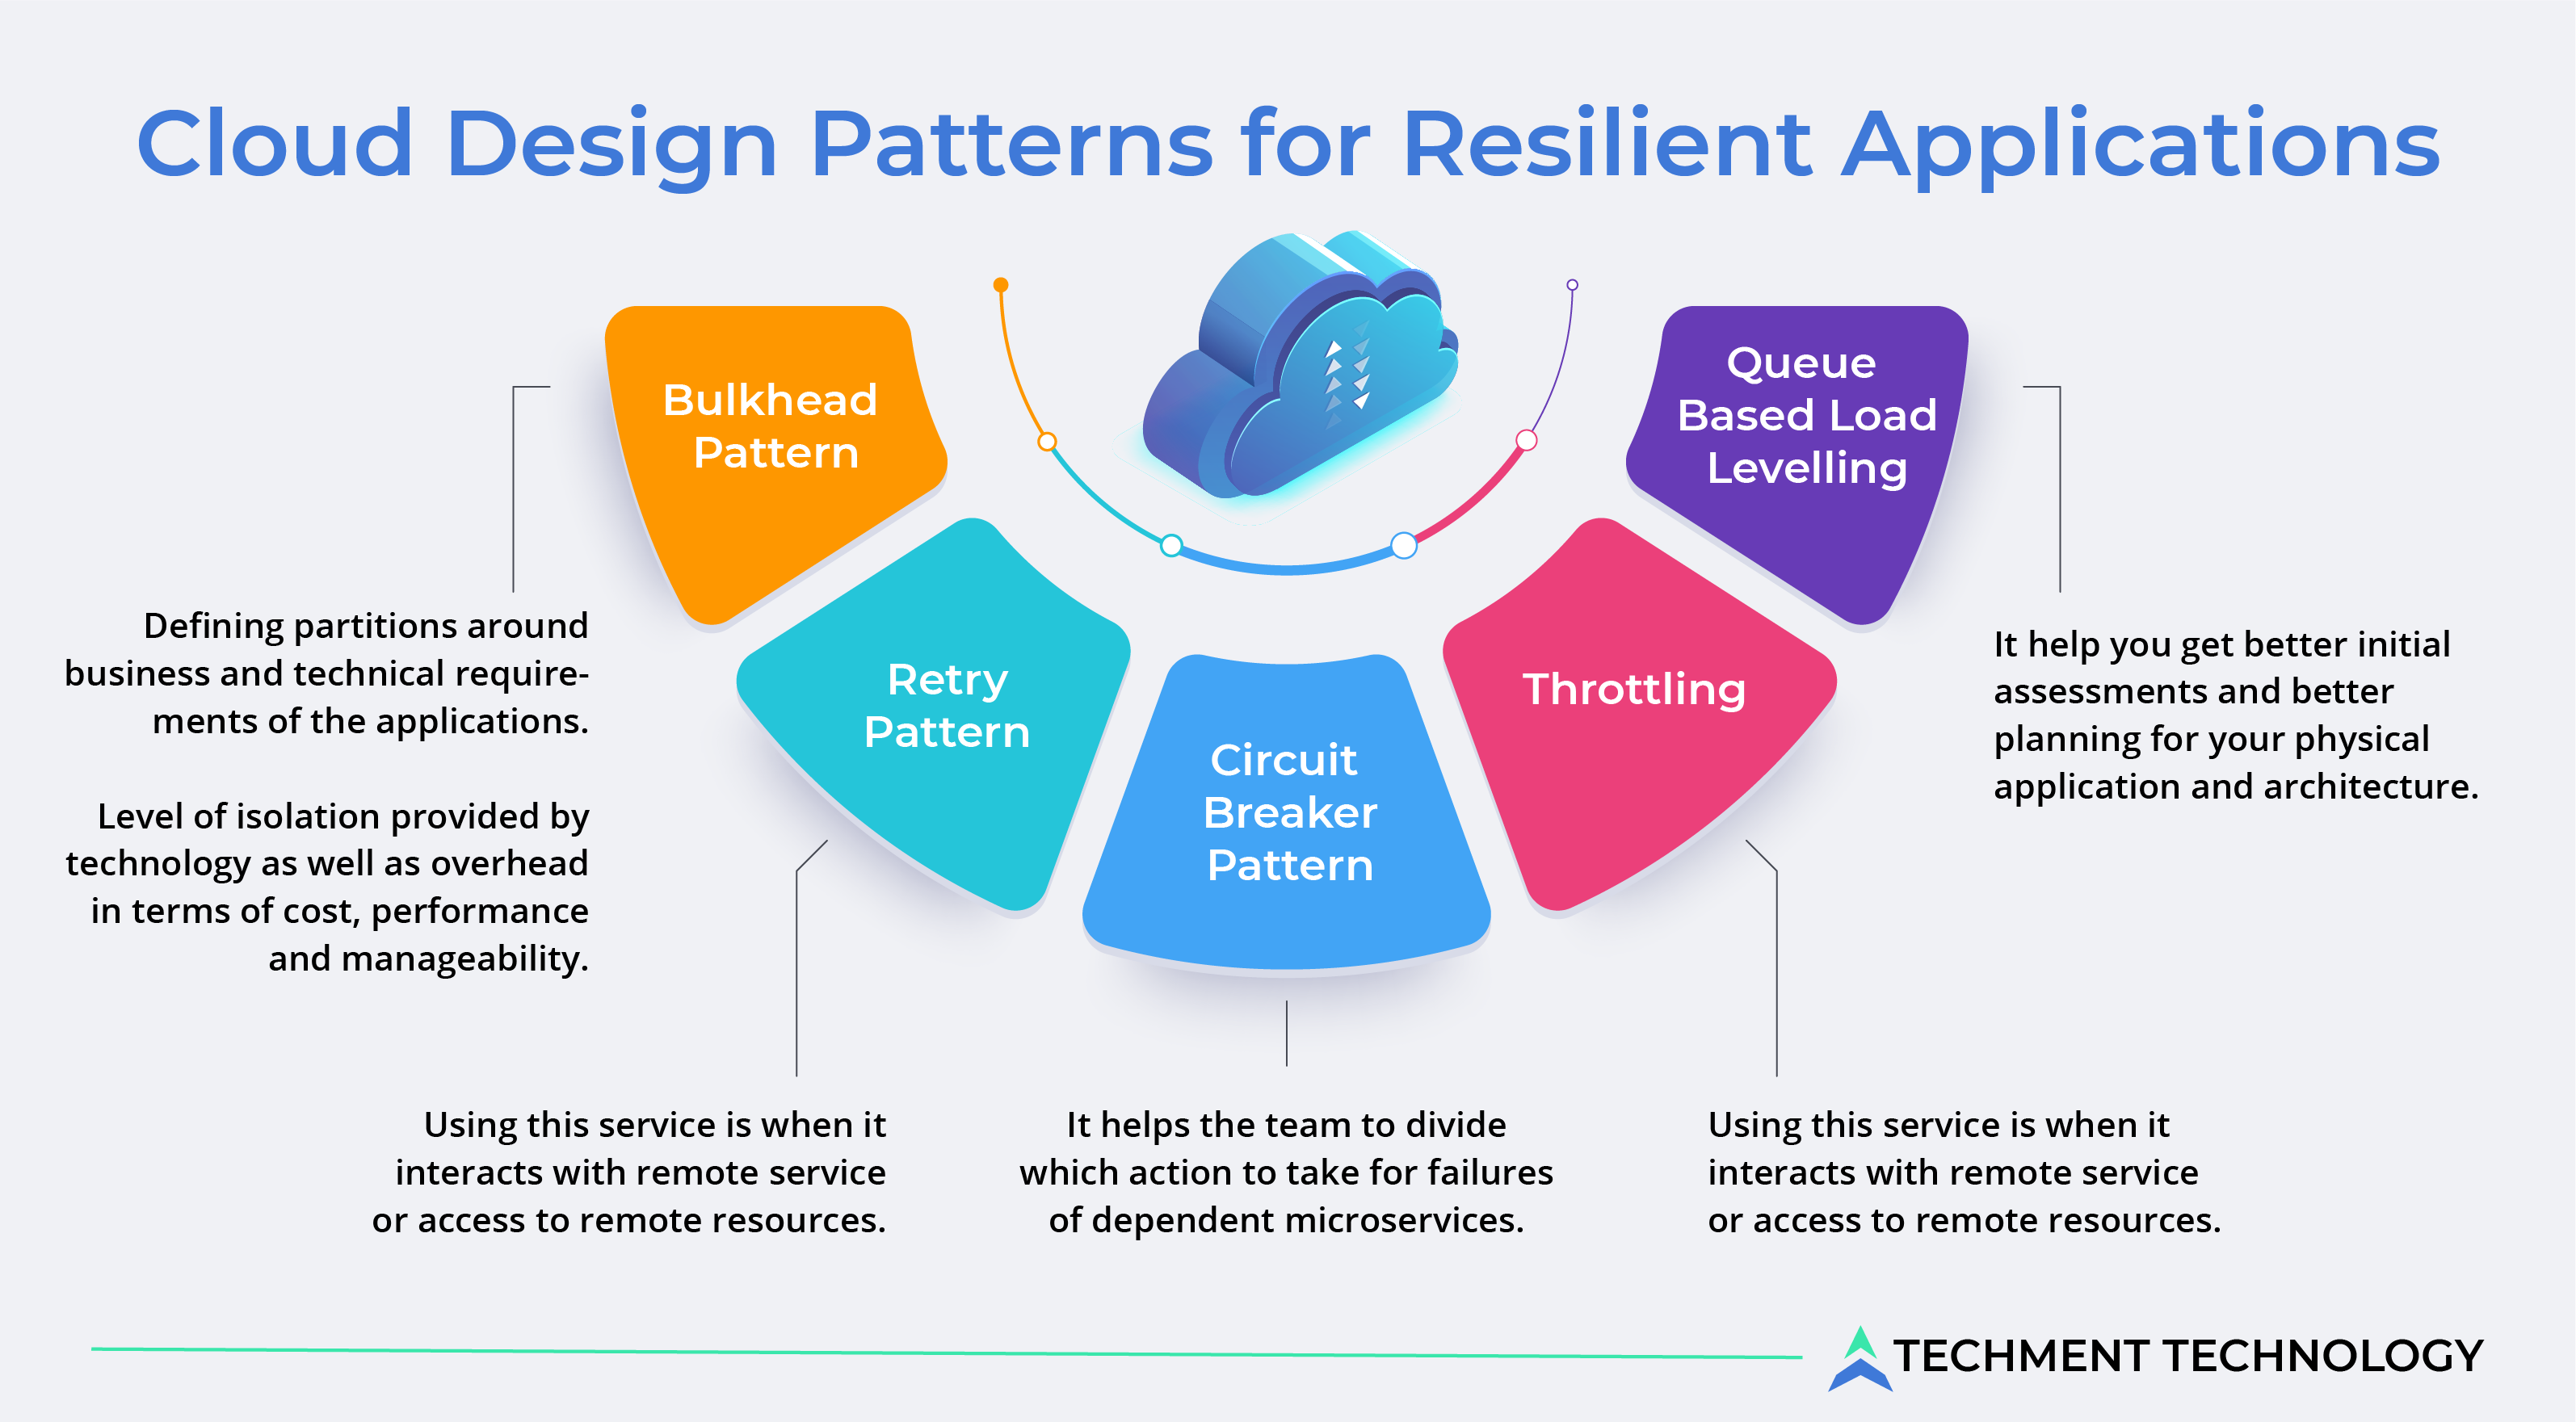 Cloud Design Patterns for Resilient Applications